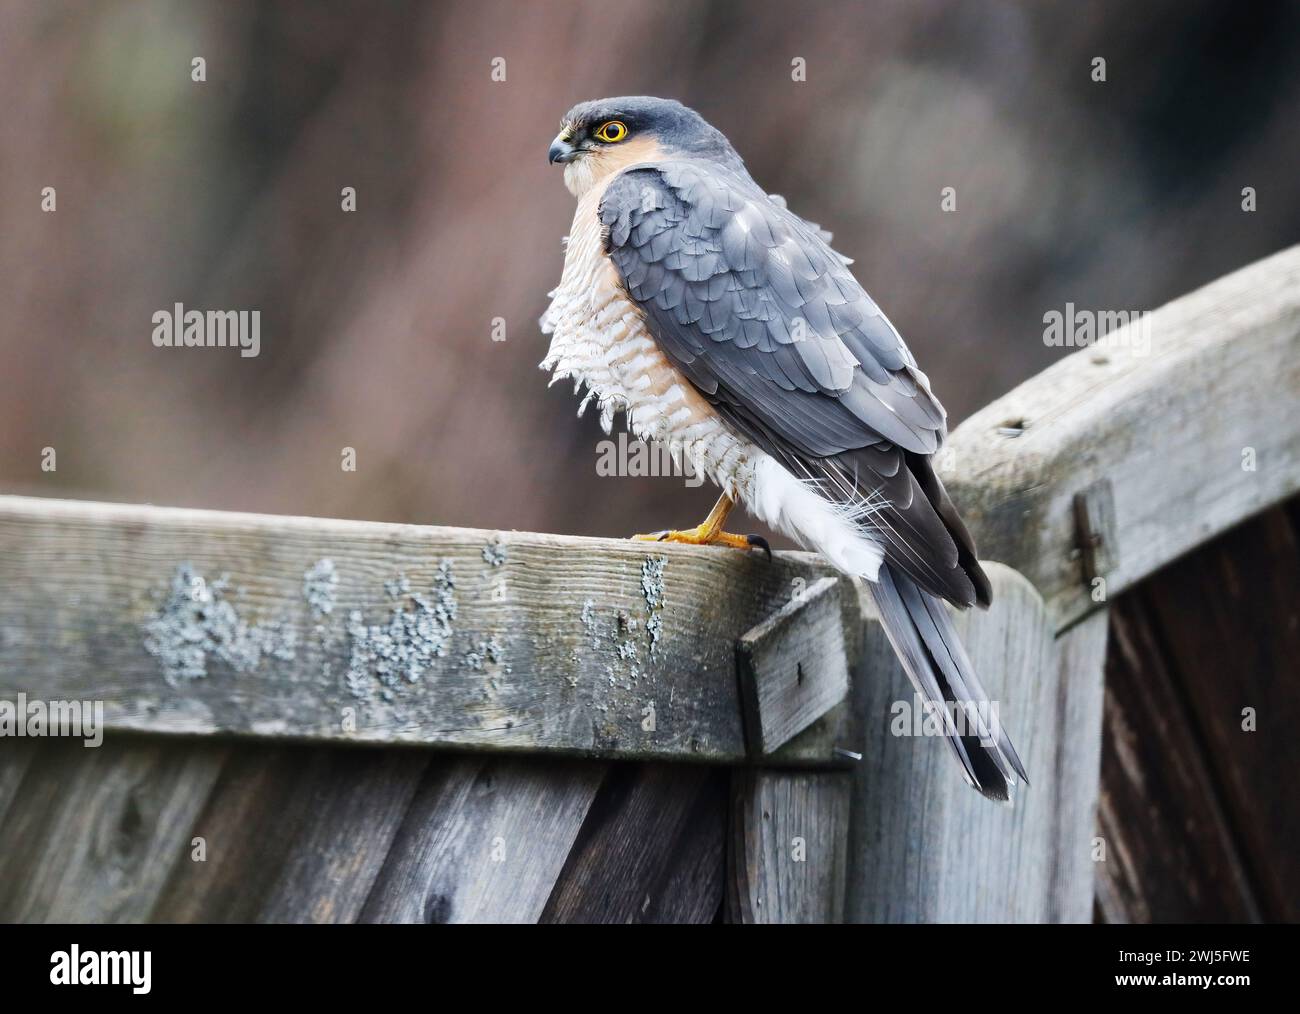 A Sparrow Hawk is sitting on a fence and waits for prey. Stock Photo